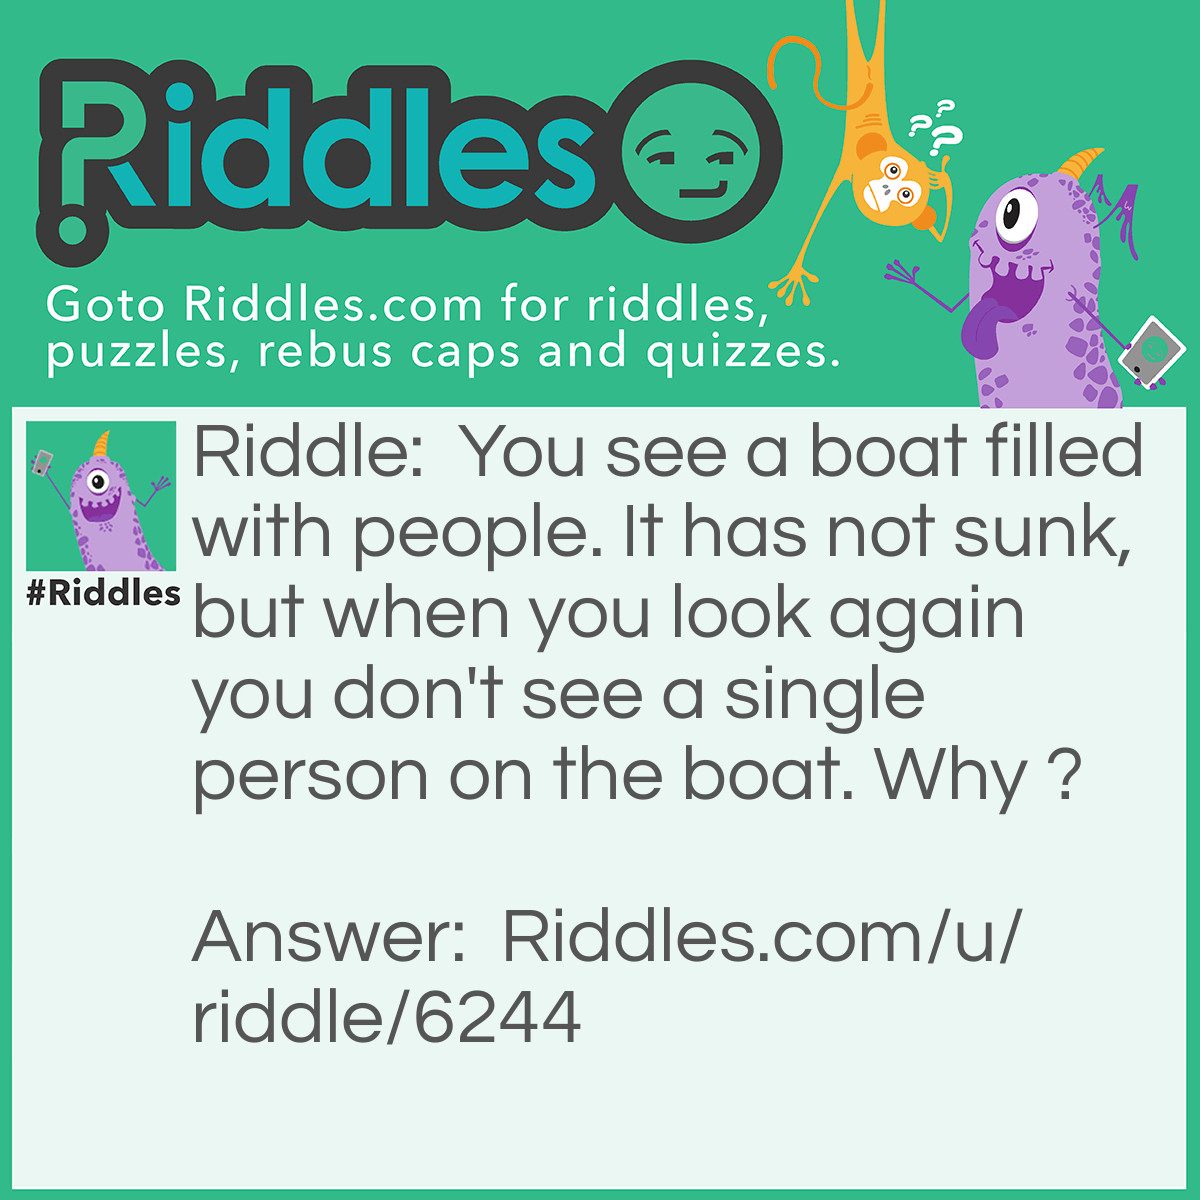 Riddle: You see a boat filled with people. It has not sunk,but when you look again you don't see a single person on the boat. Why ? Answer: All the people were married.